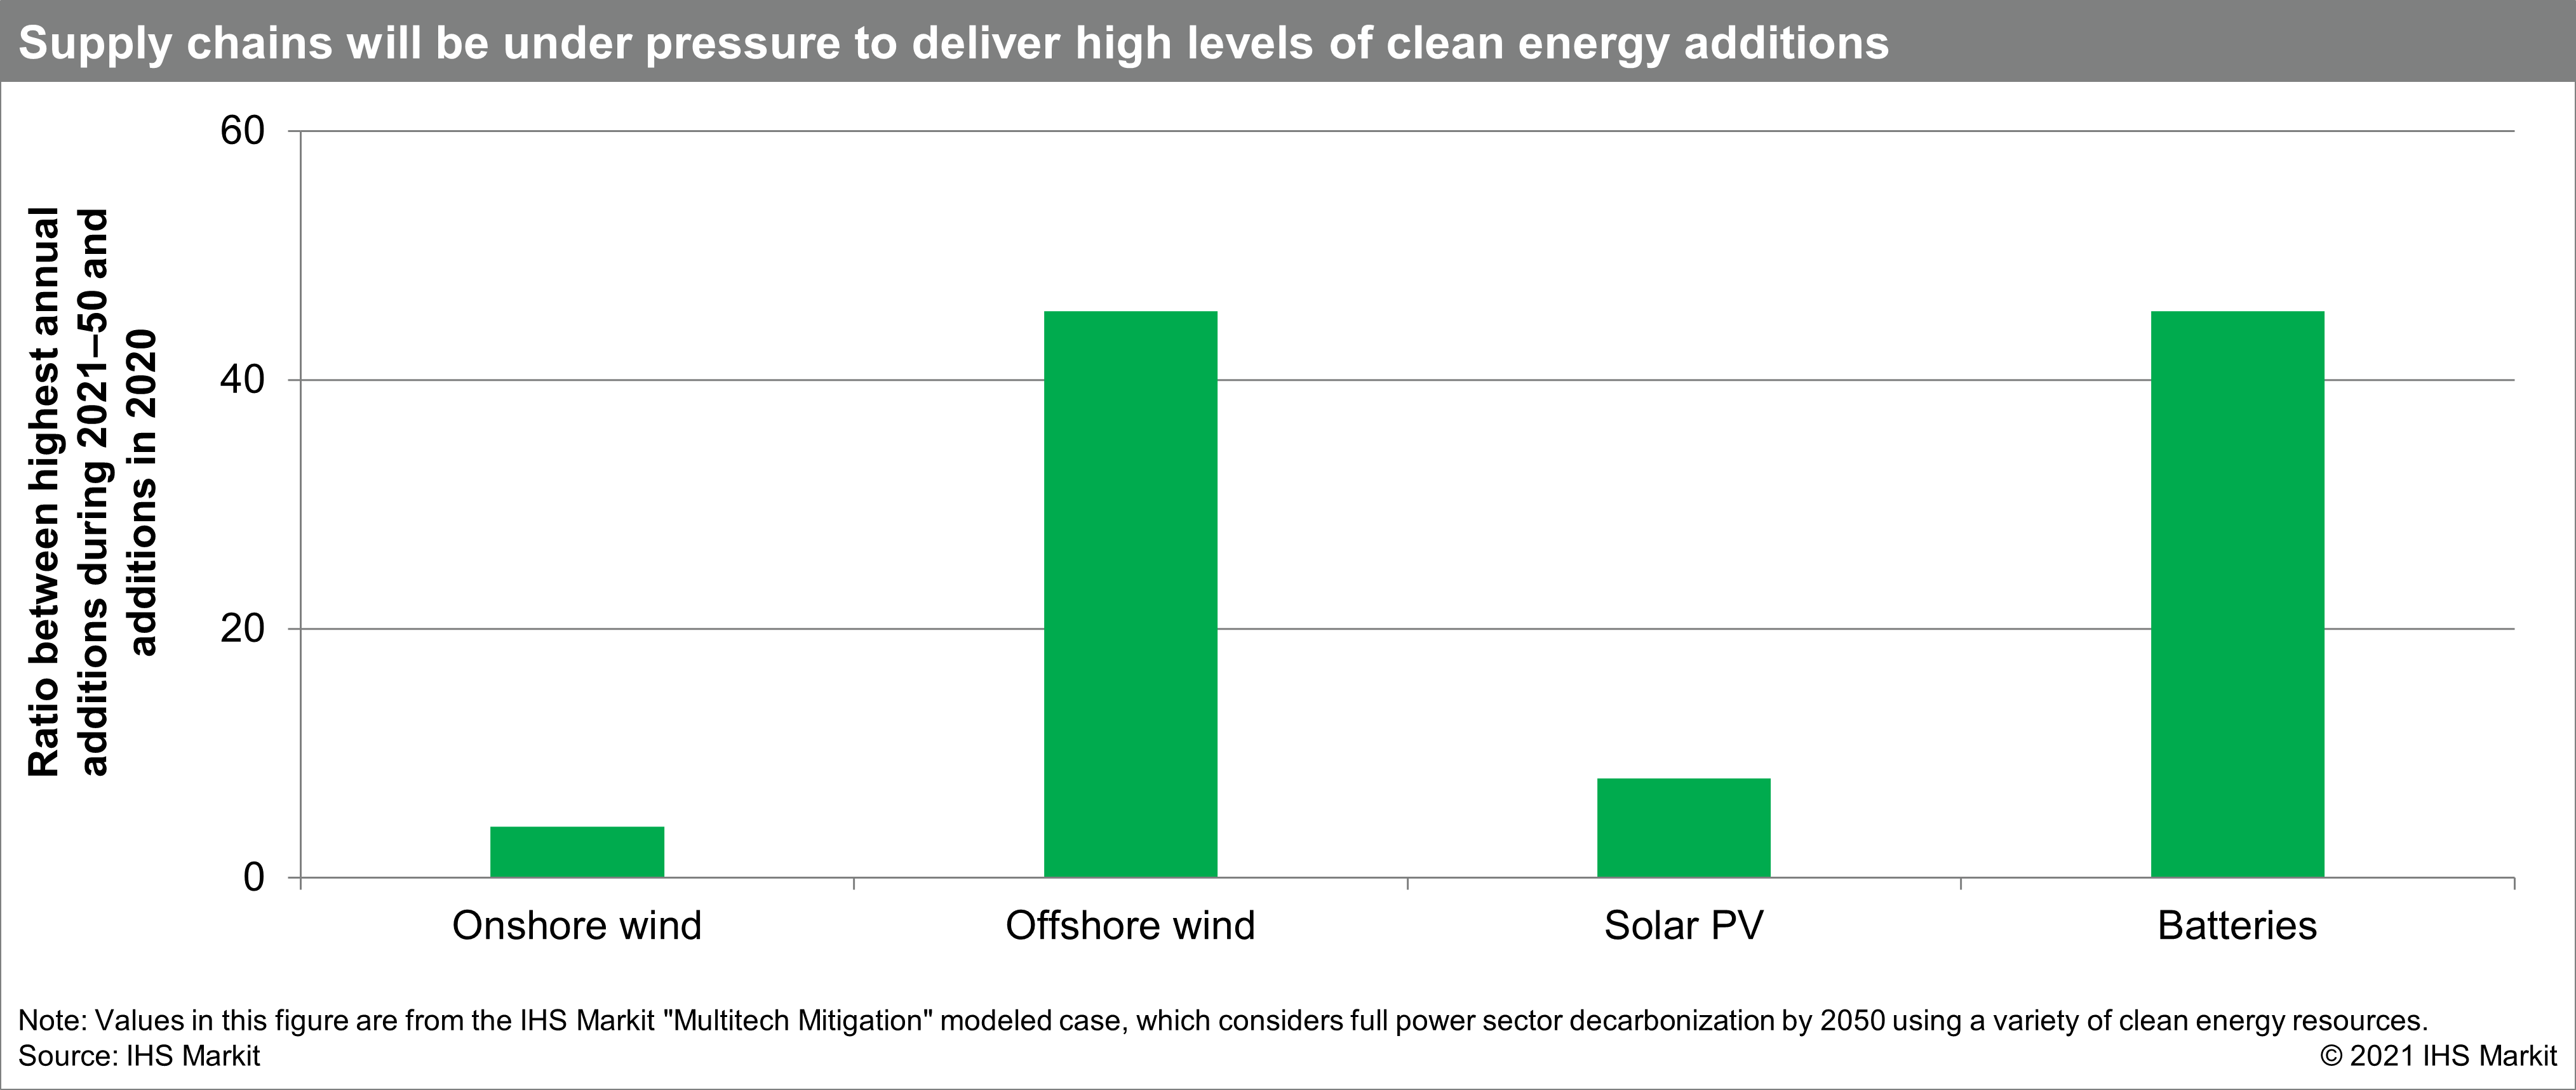 Supply chains will be under pressure to deliver high levels of clean energy additions